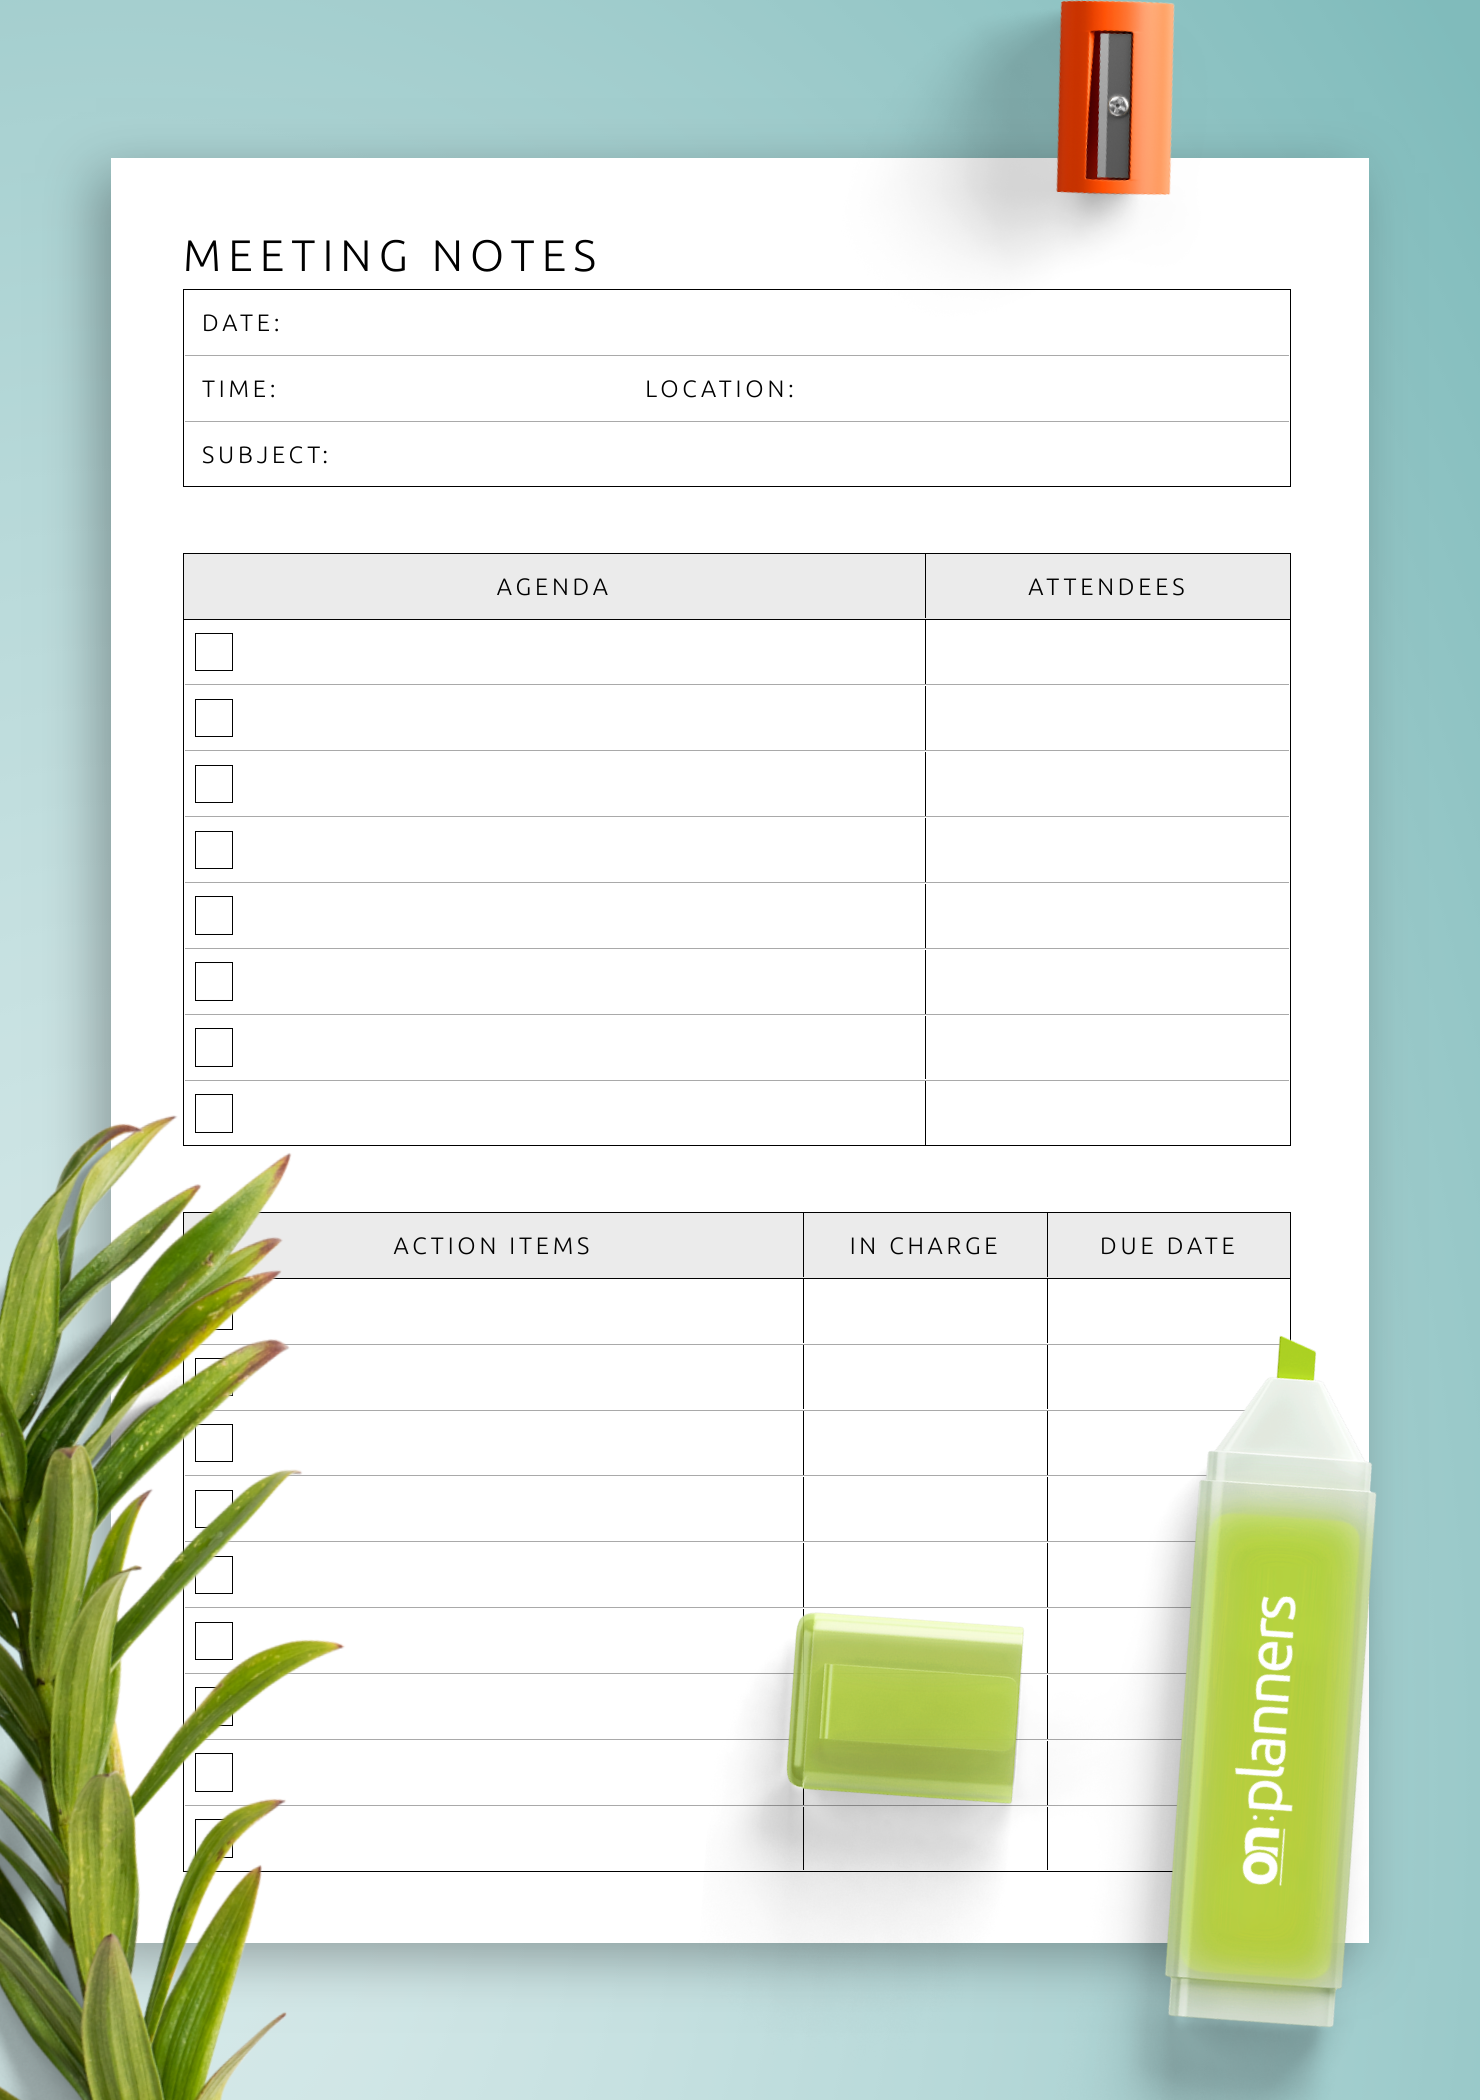 Meeting Notes Planner Inserts